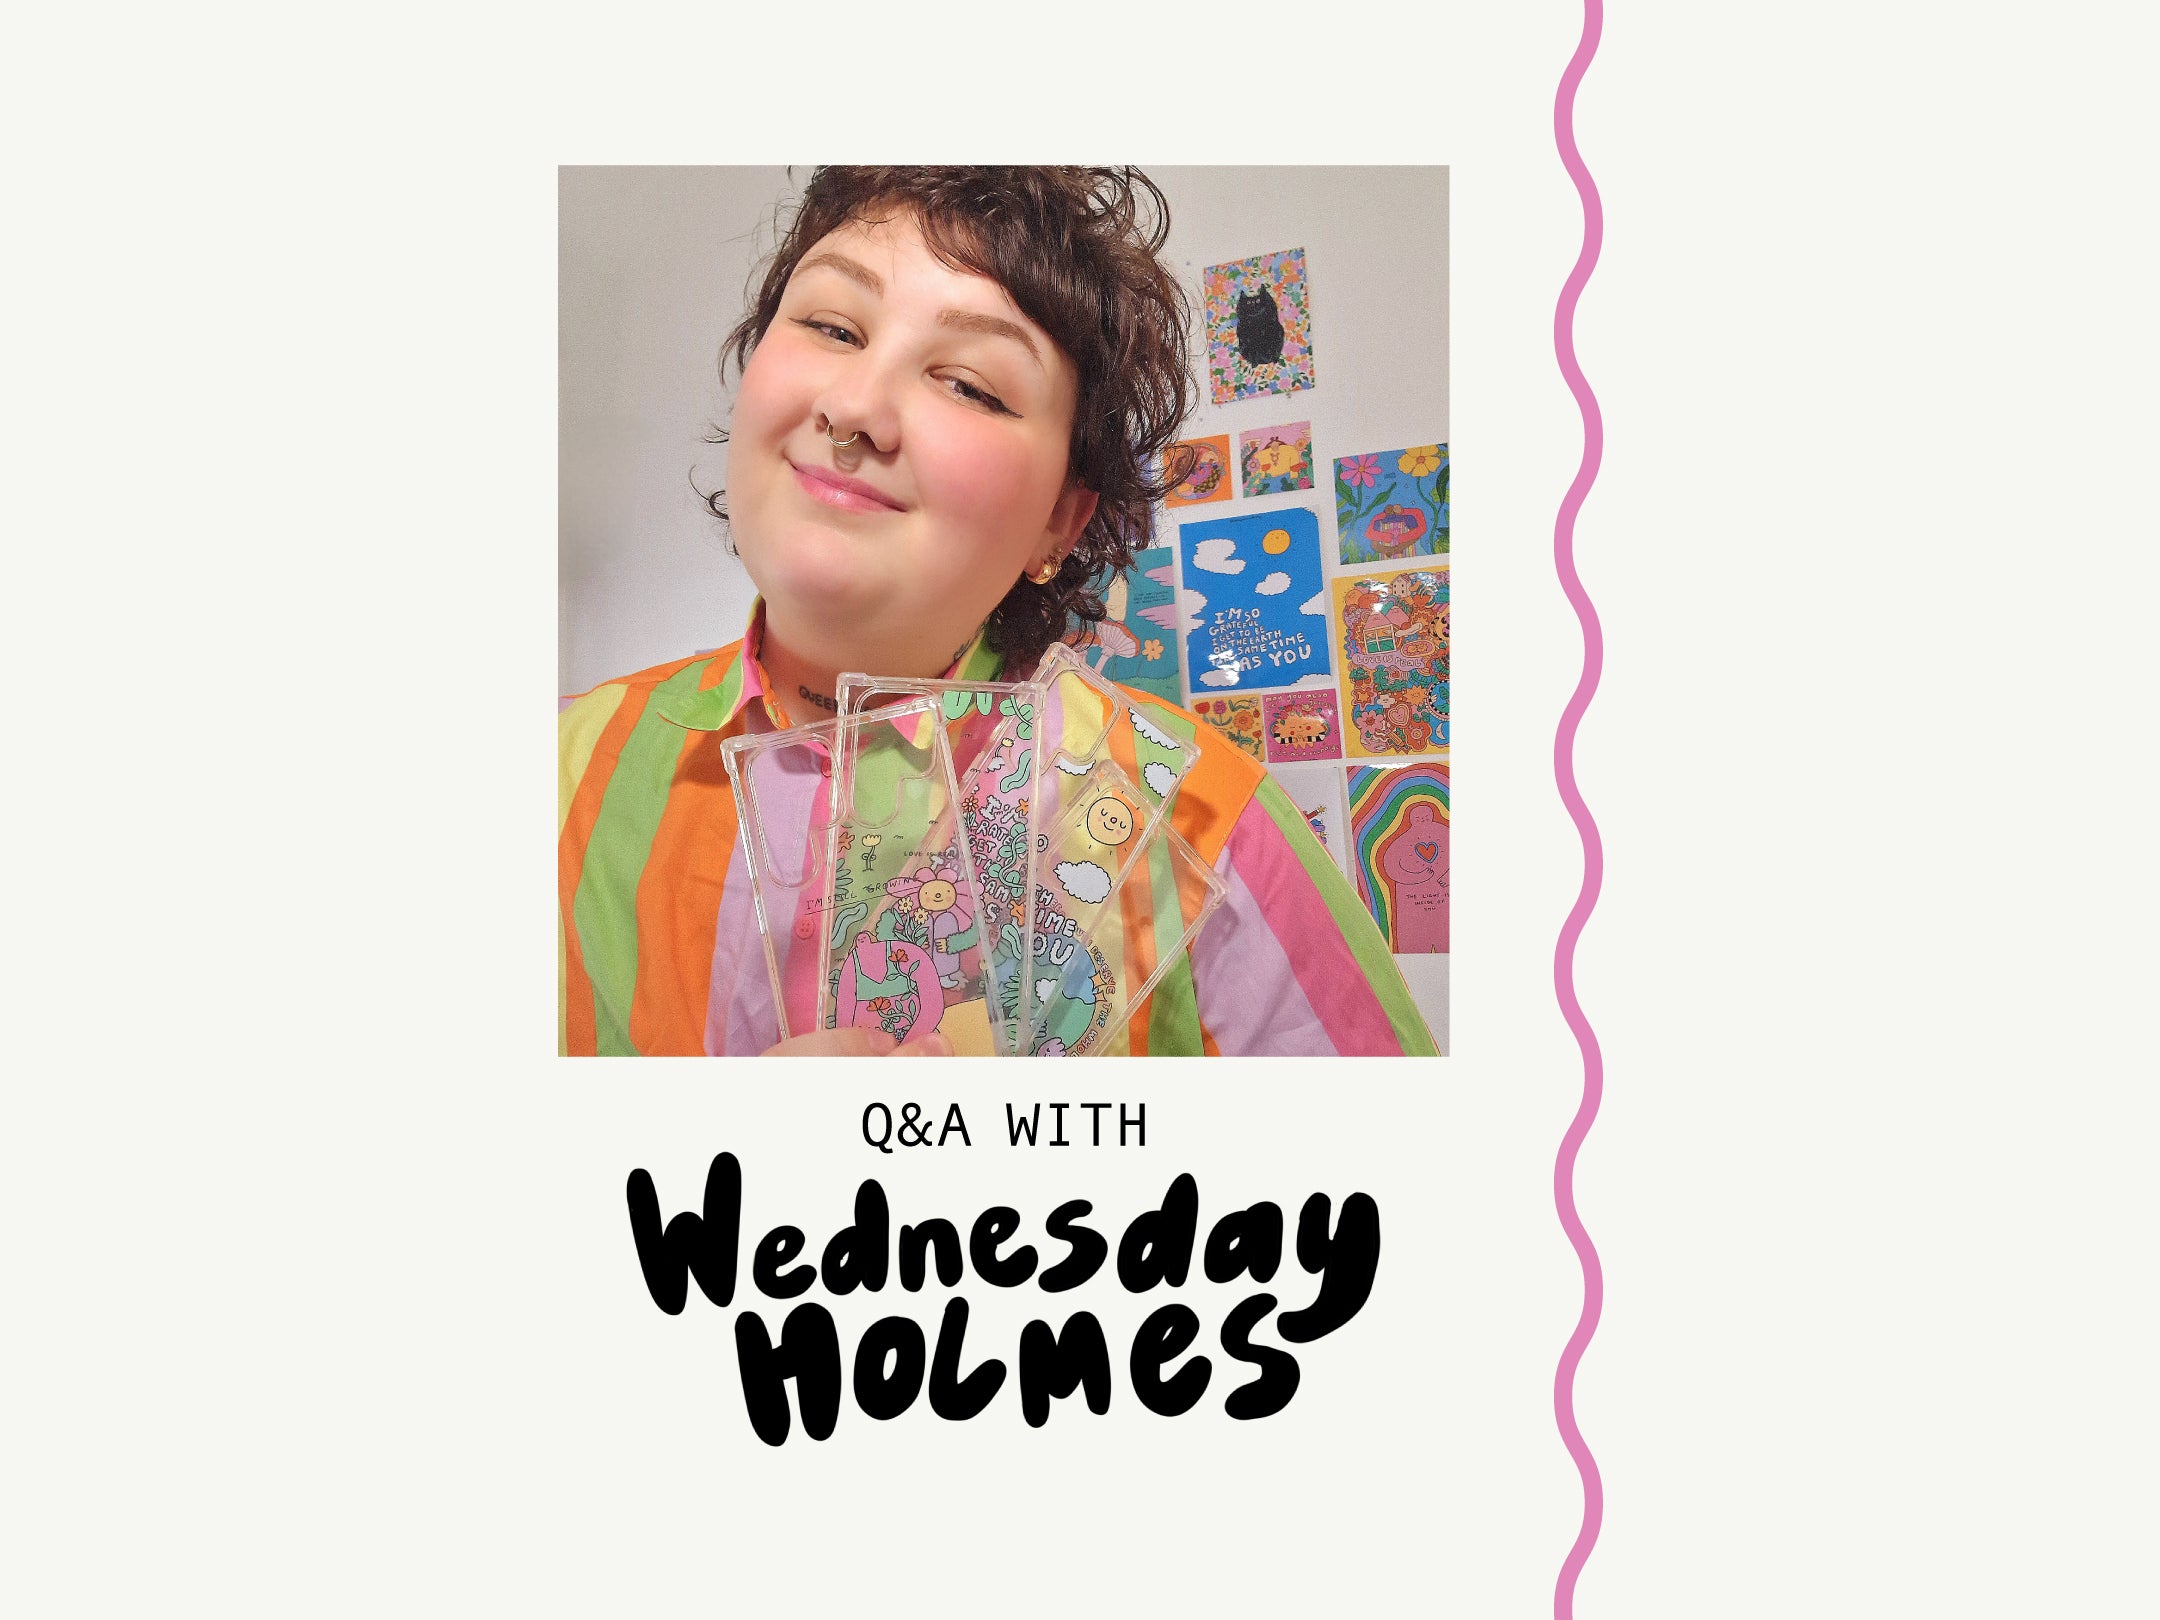 Q&A With Wednesday Holmes